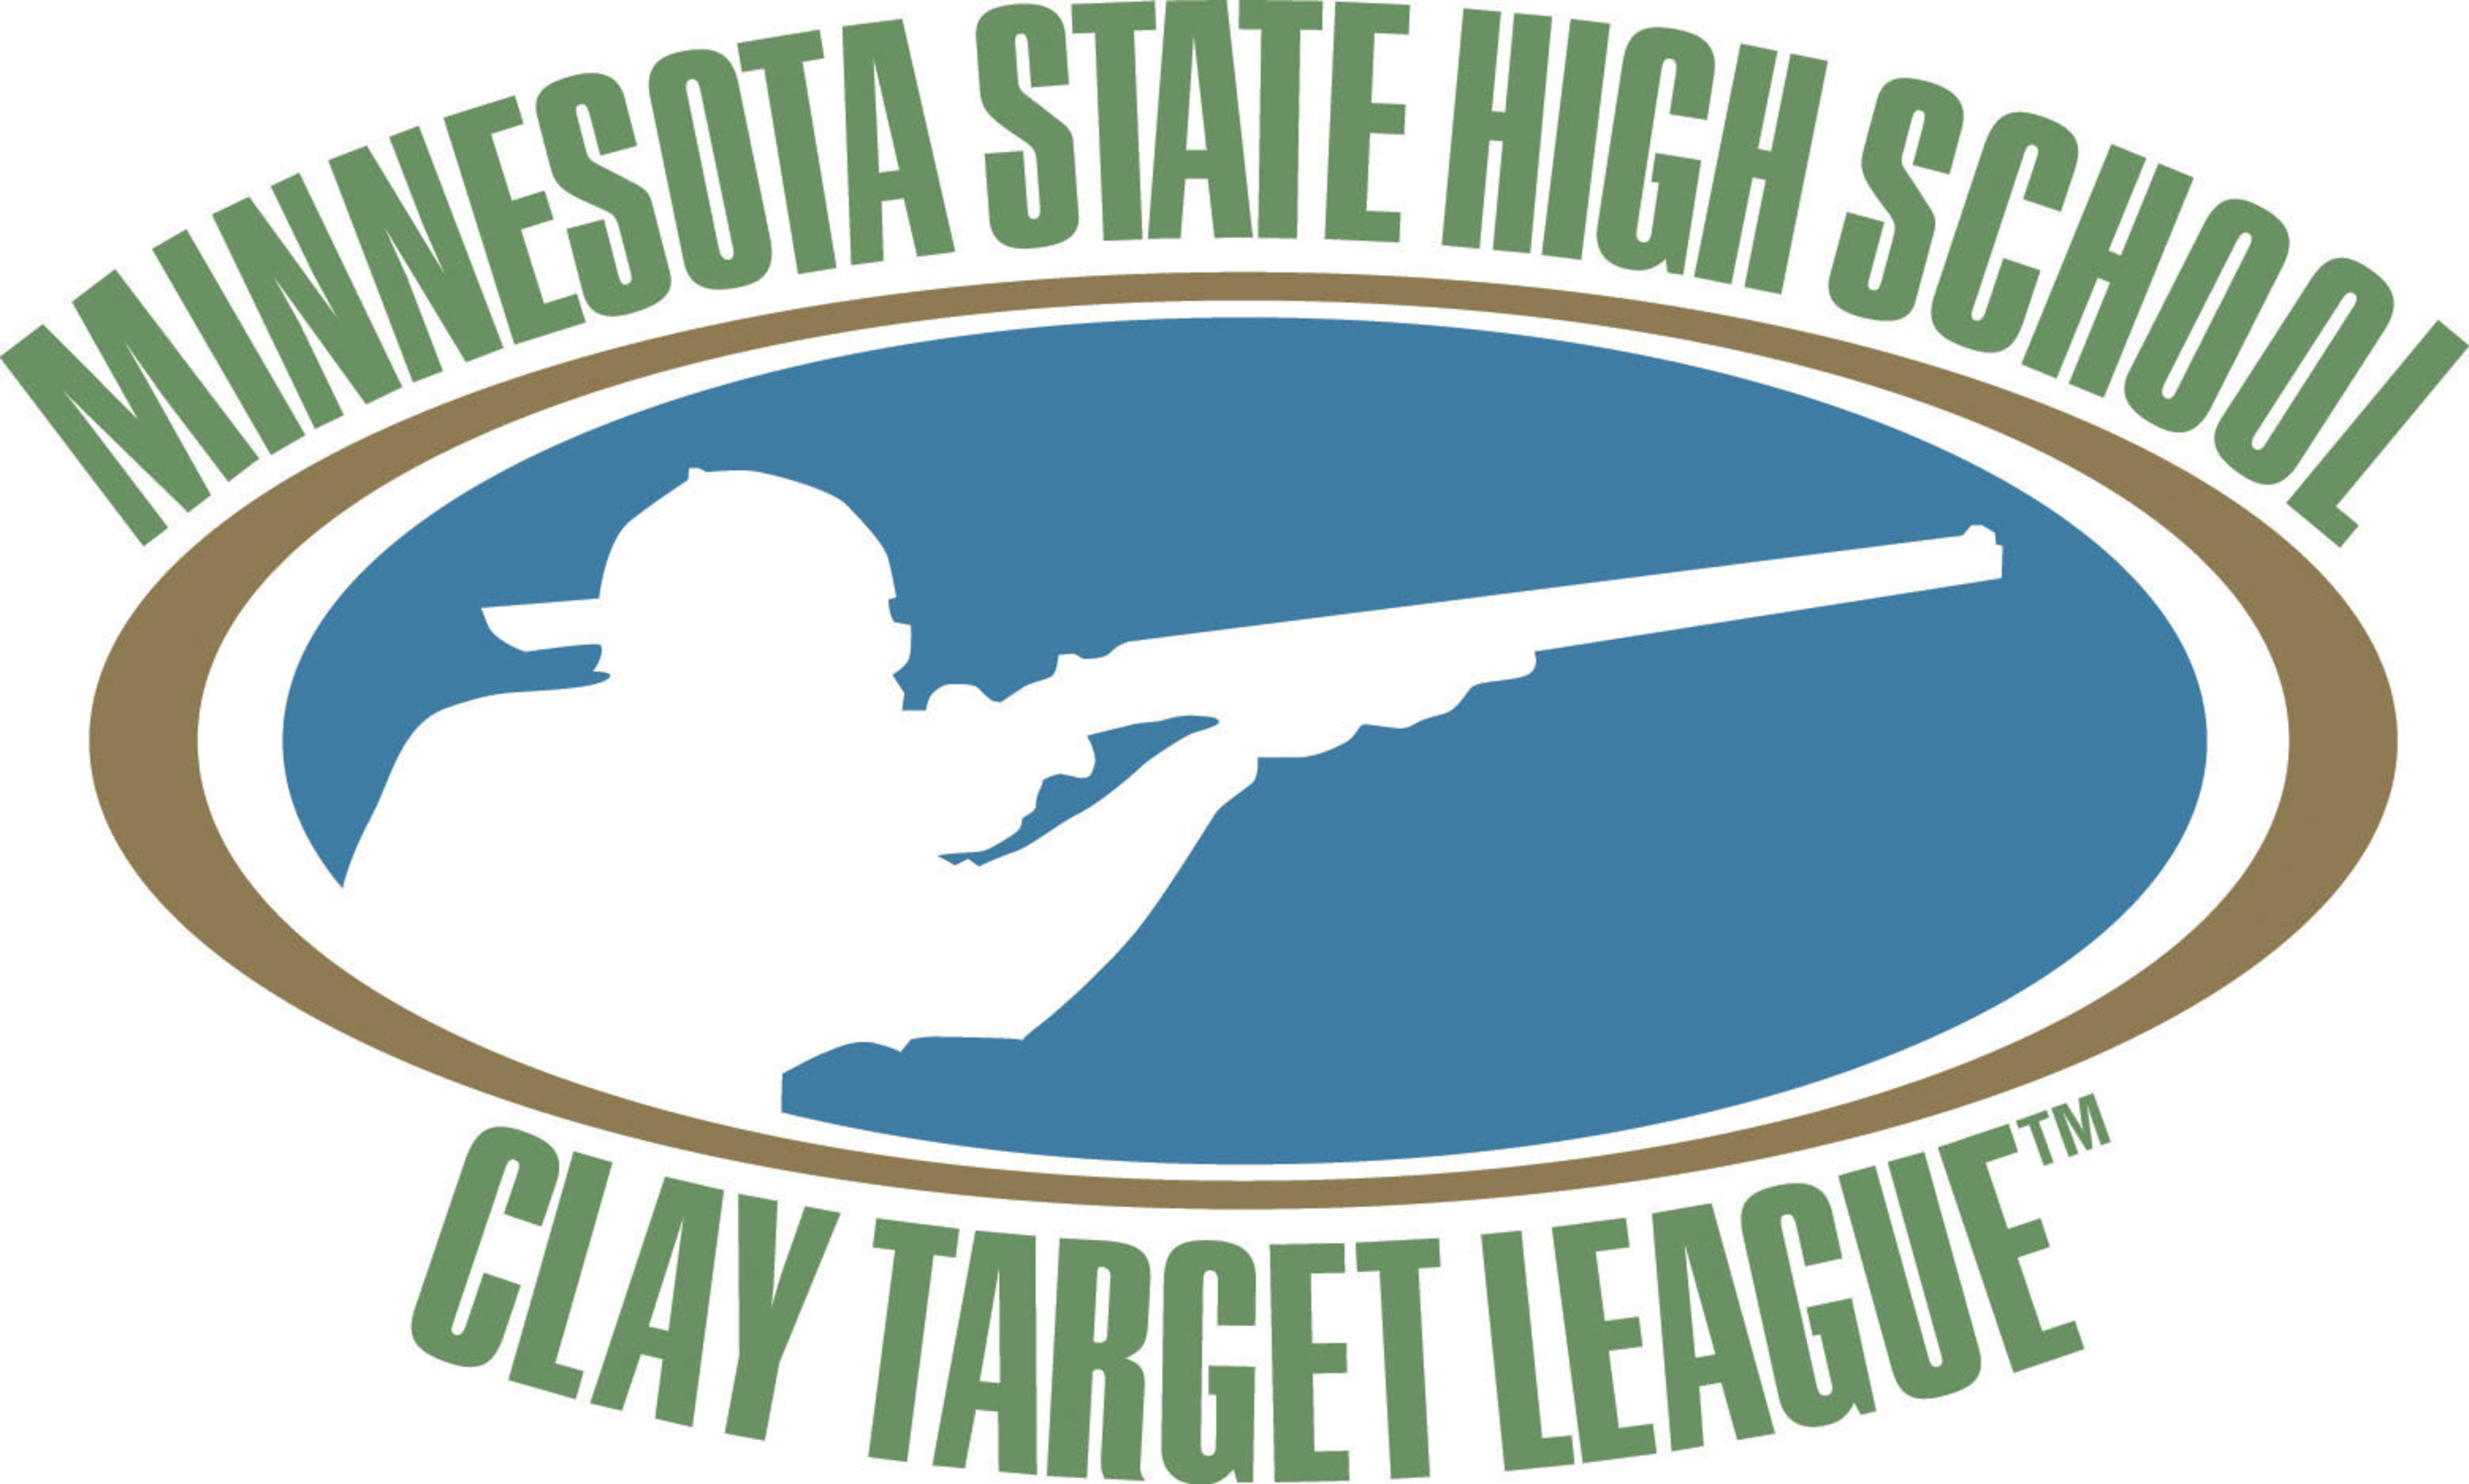 The USA High School Clay Target League is a 501(c)(3) non-profit organization and operates the Minnesota State High School Clay Target League as the independent provider of shooting sports as an extra curricular co-ed and adapted activity for high schools and students in grades six through 12 who have earned their Firearms Safety Certification. The organization's priorities are safety, fun and marksmanship - in that order. (PRNewsFoto/Minnesota State High School Clay Target League)